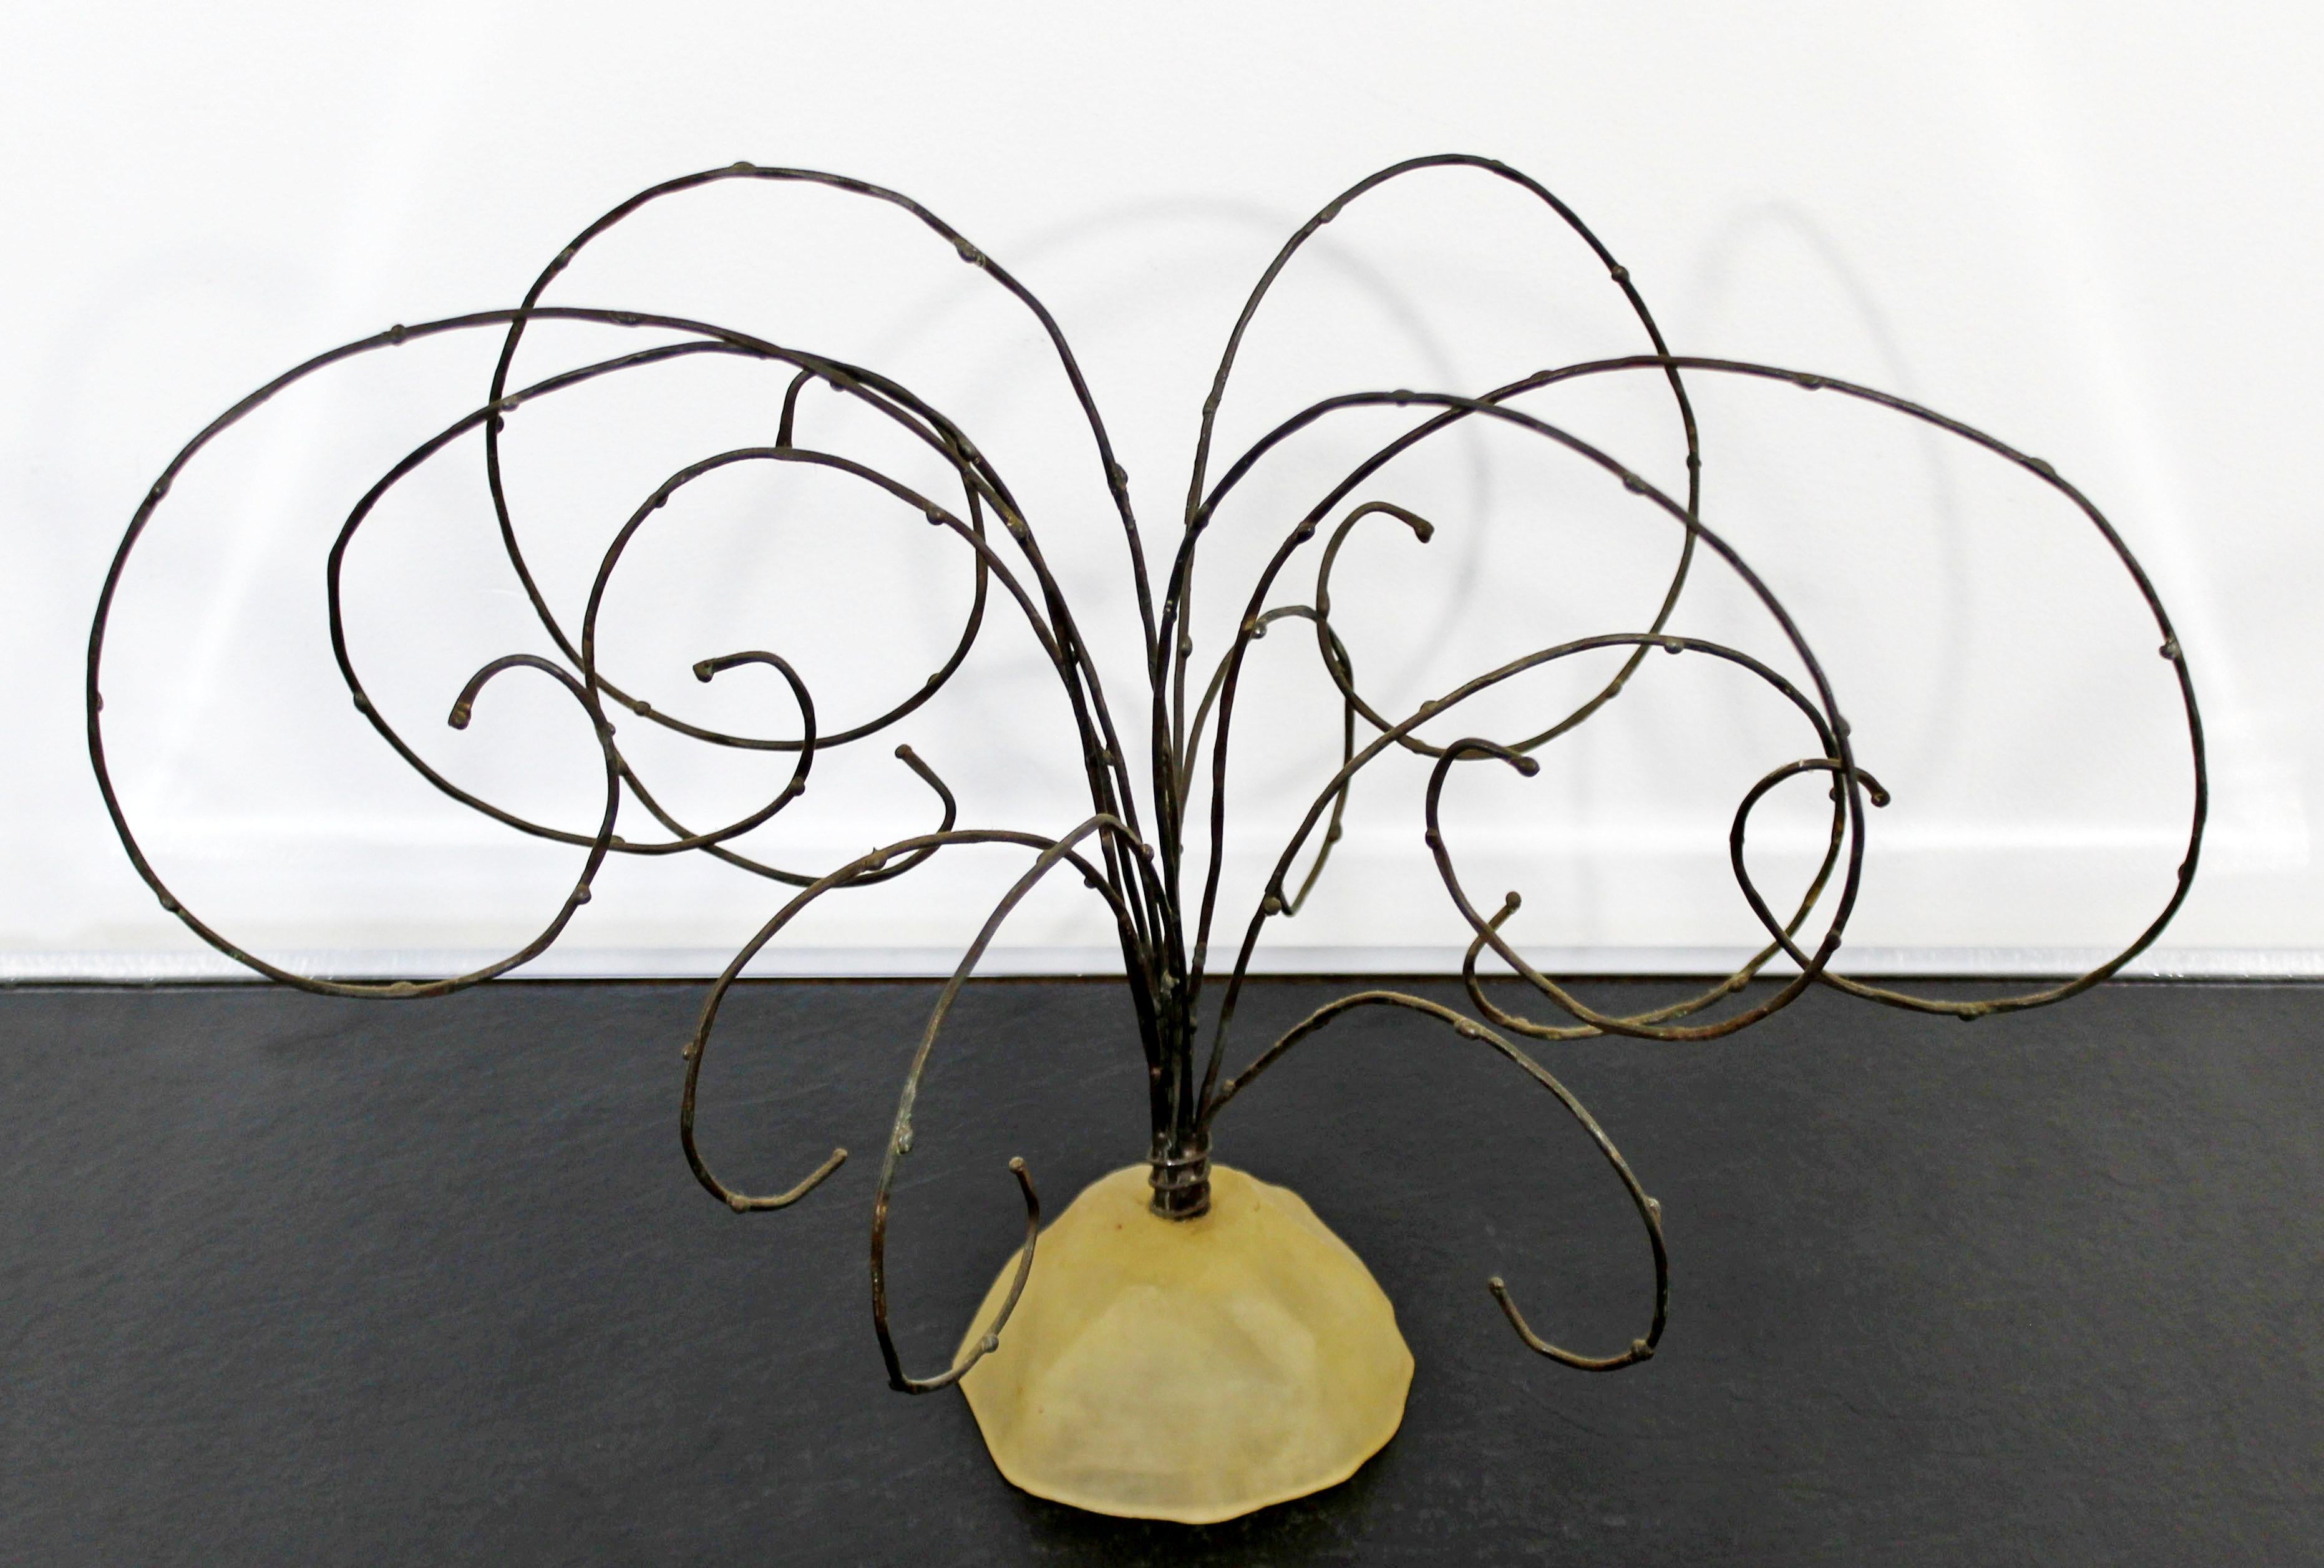 For your consideration is a beautiful, Brutalist, abstracted tree, threaded metal wire table sculpture on an acrylic base, circa 1960s. In excellent vintage condition. The dimensions are 18